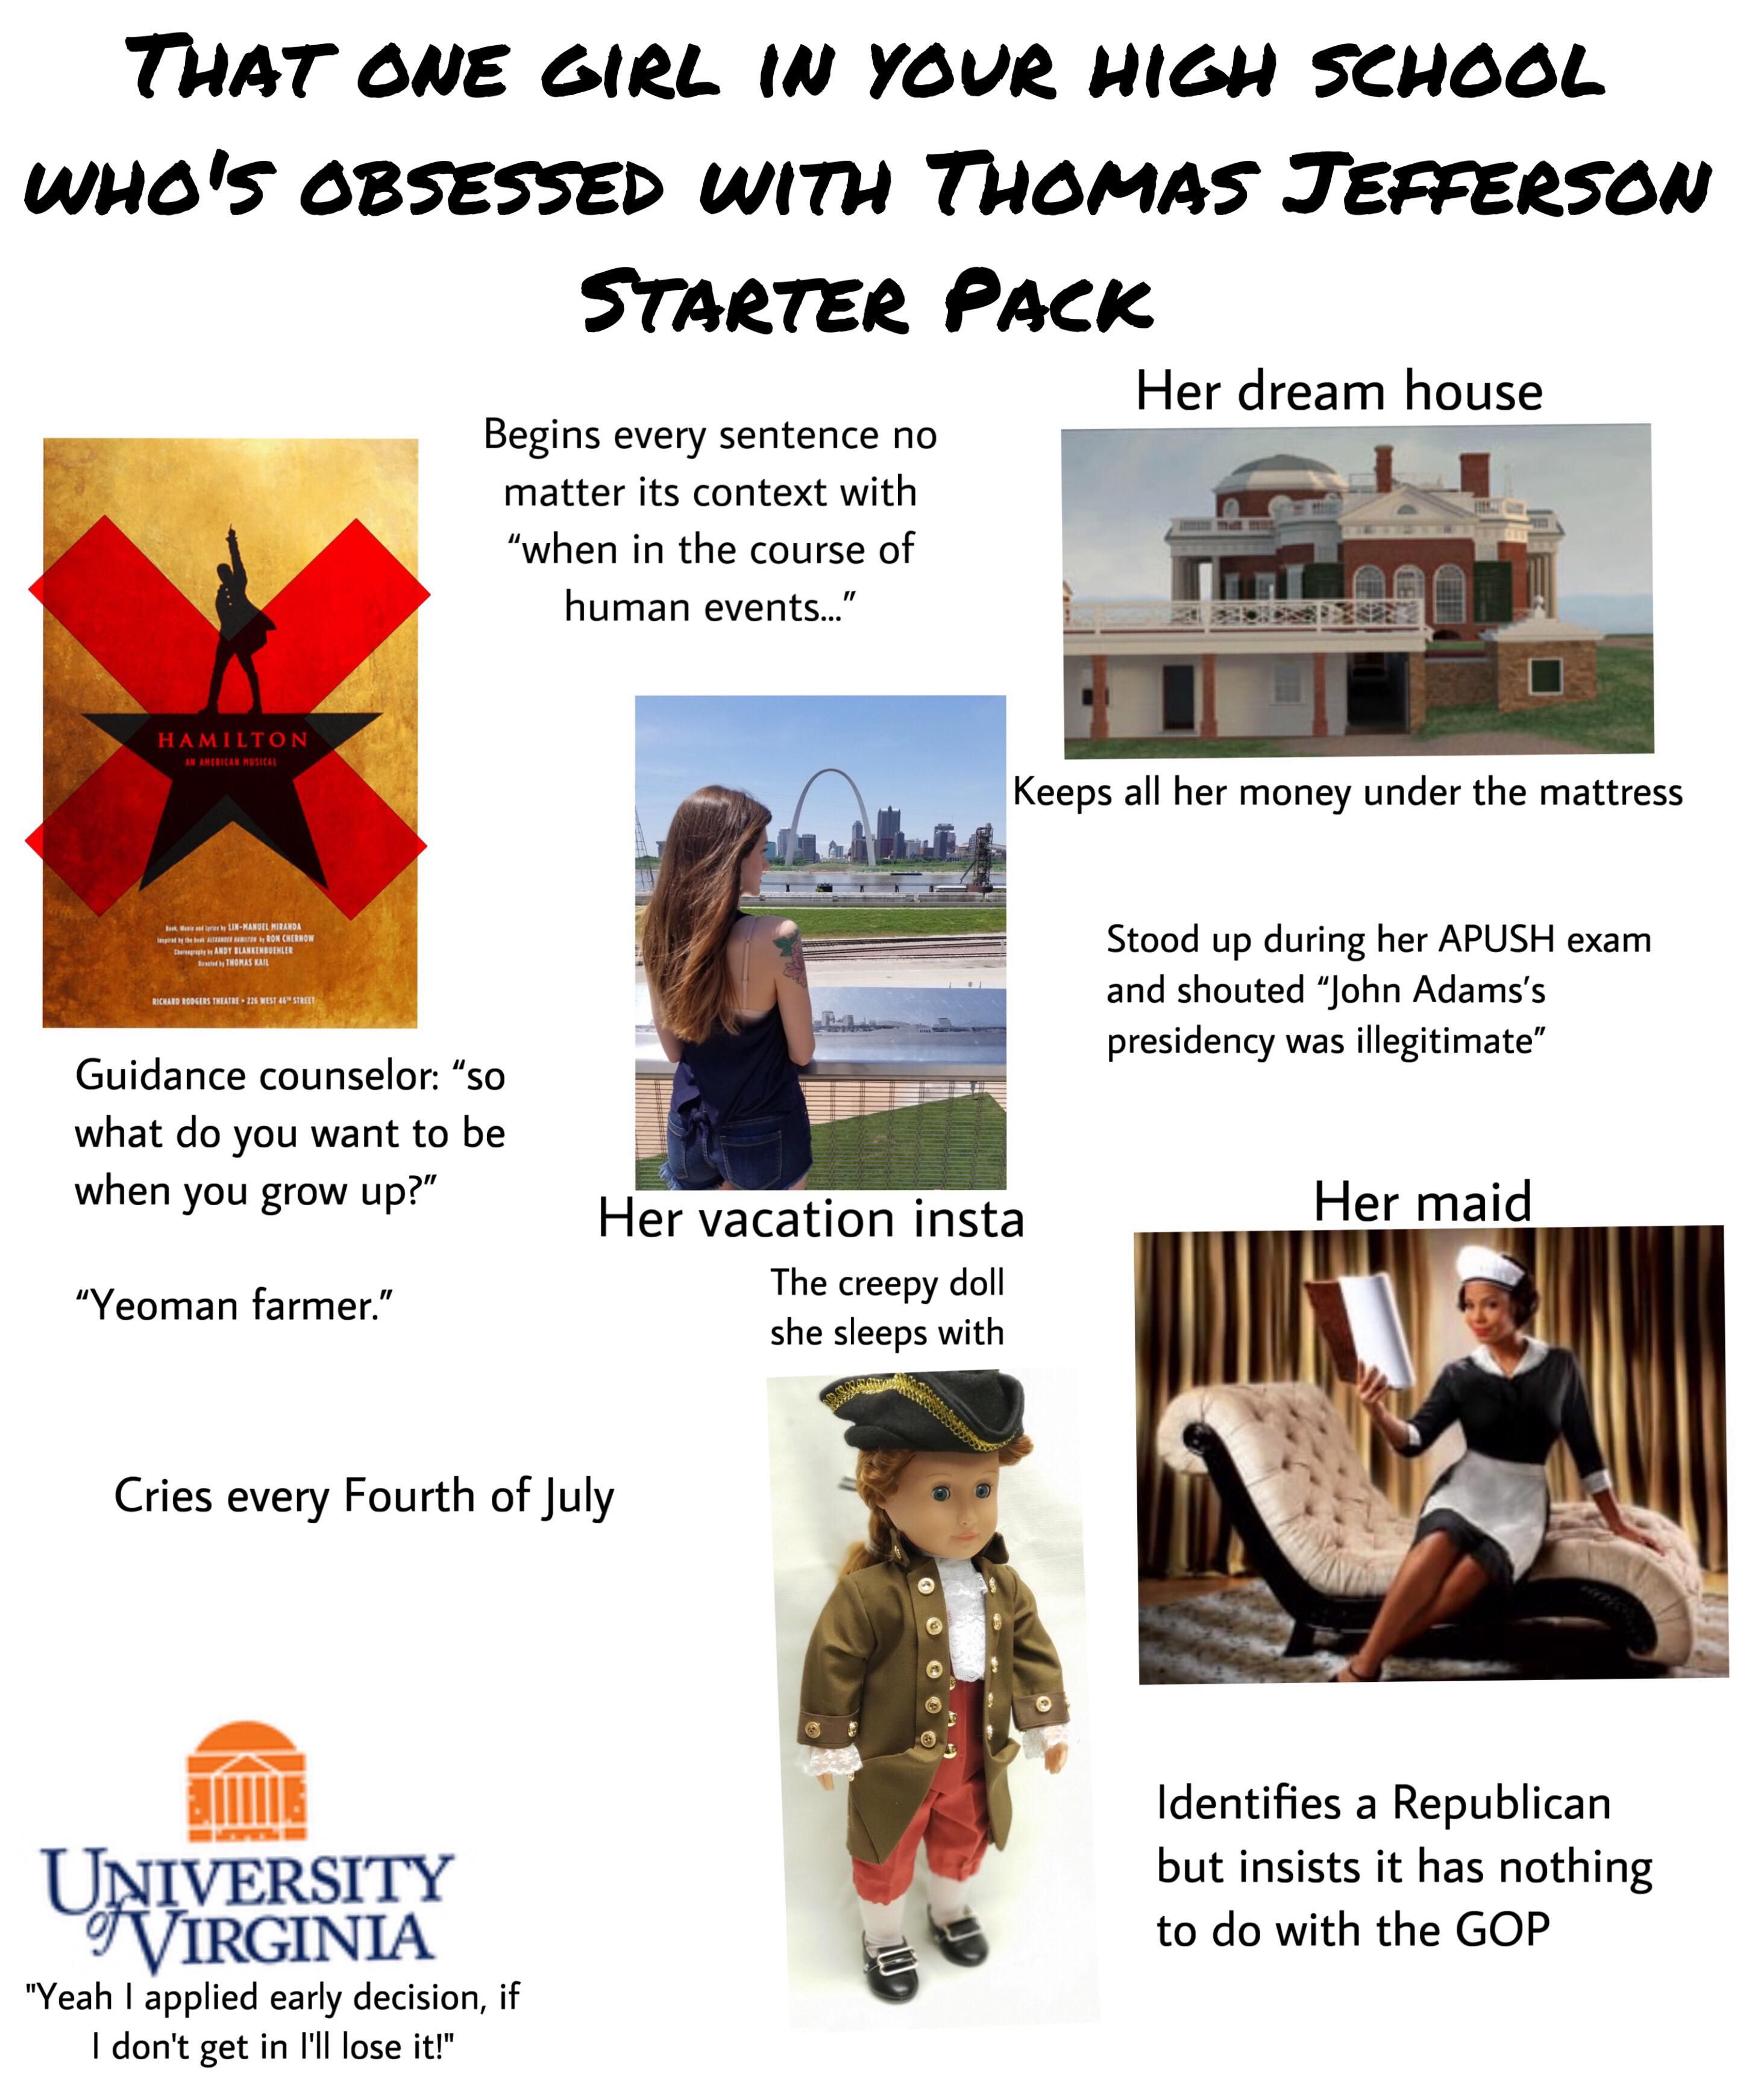 That one girl in your high school who's unreasonably obsessed with Thomas Jefferson starterpack